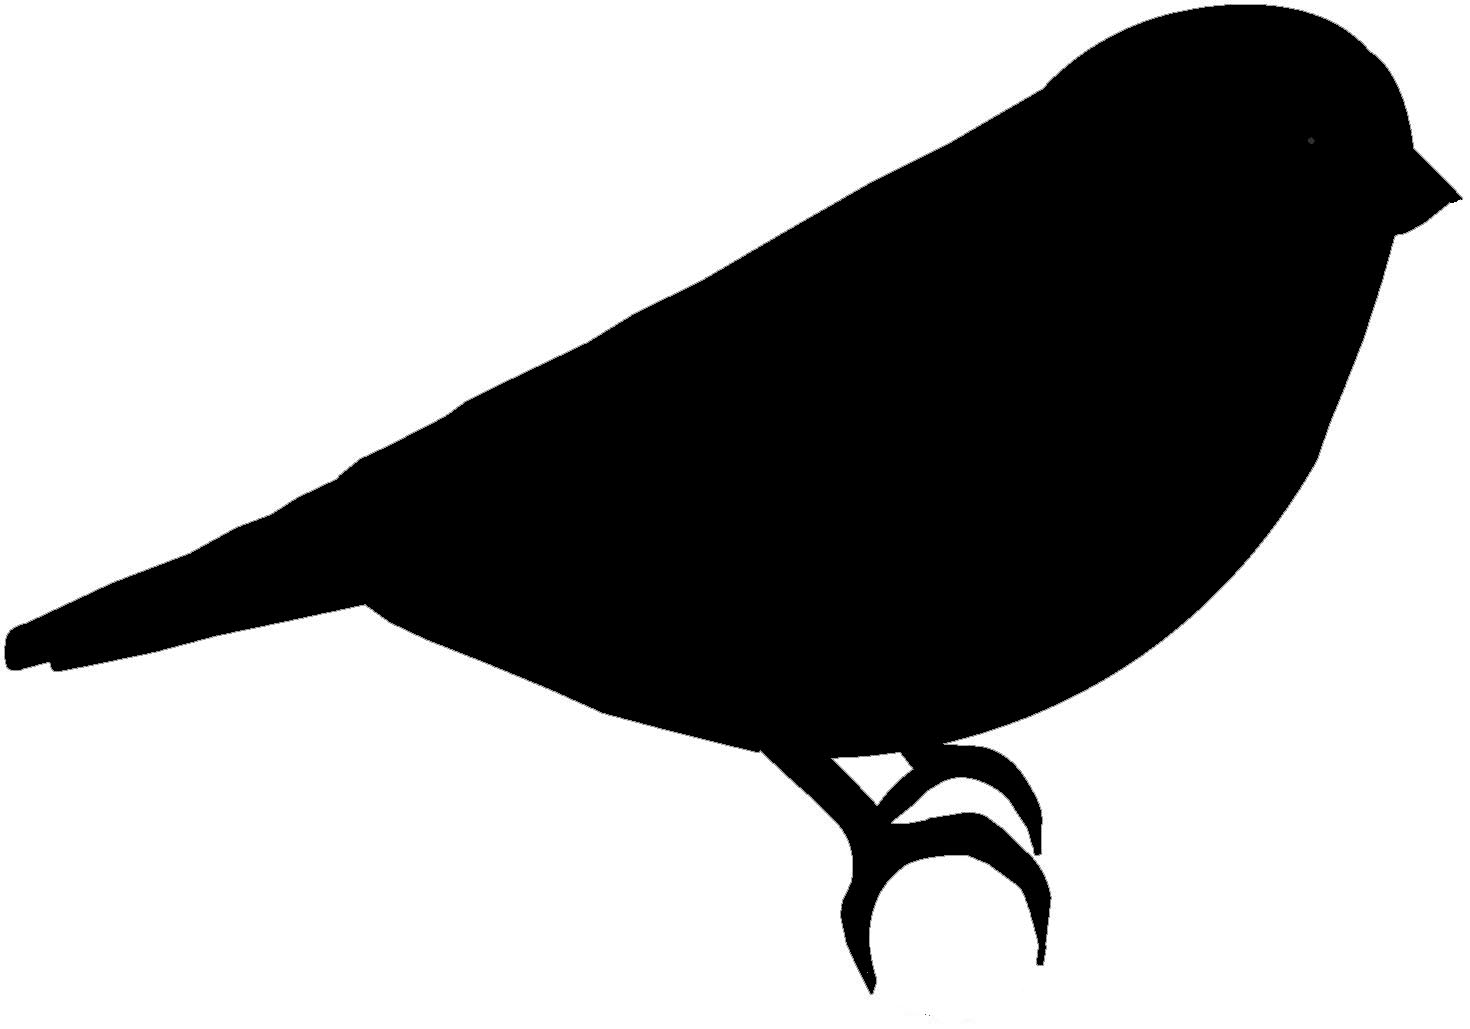 Free clipart for black silhouette of small birds